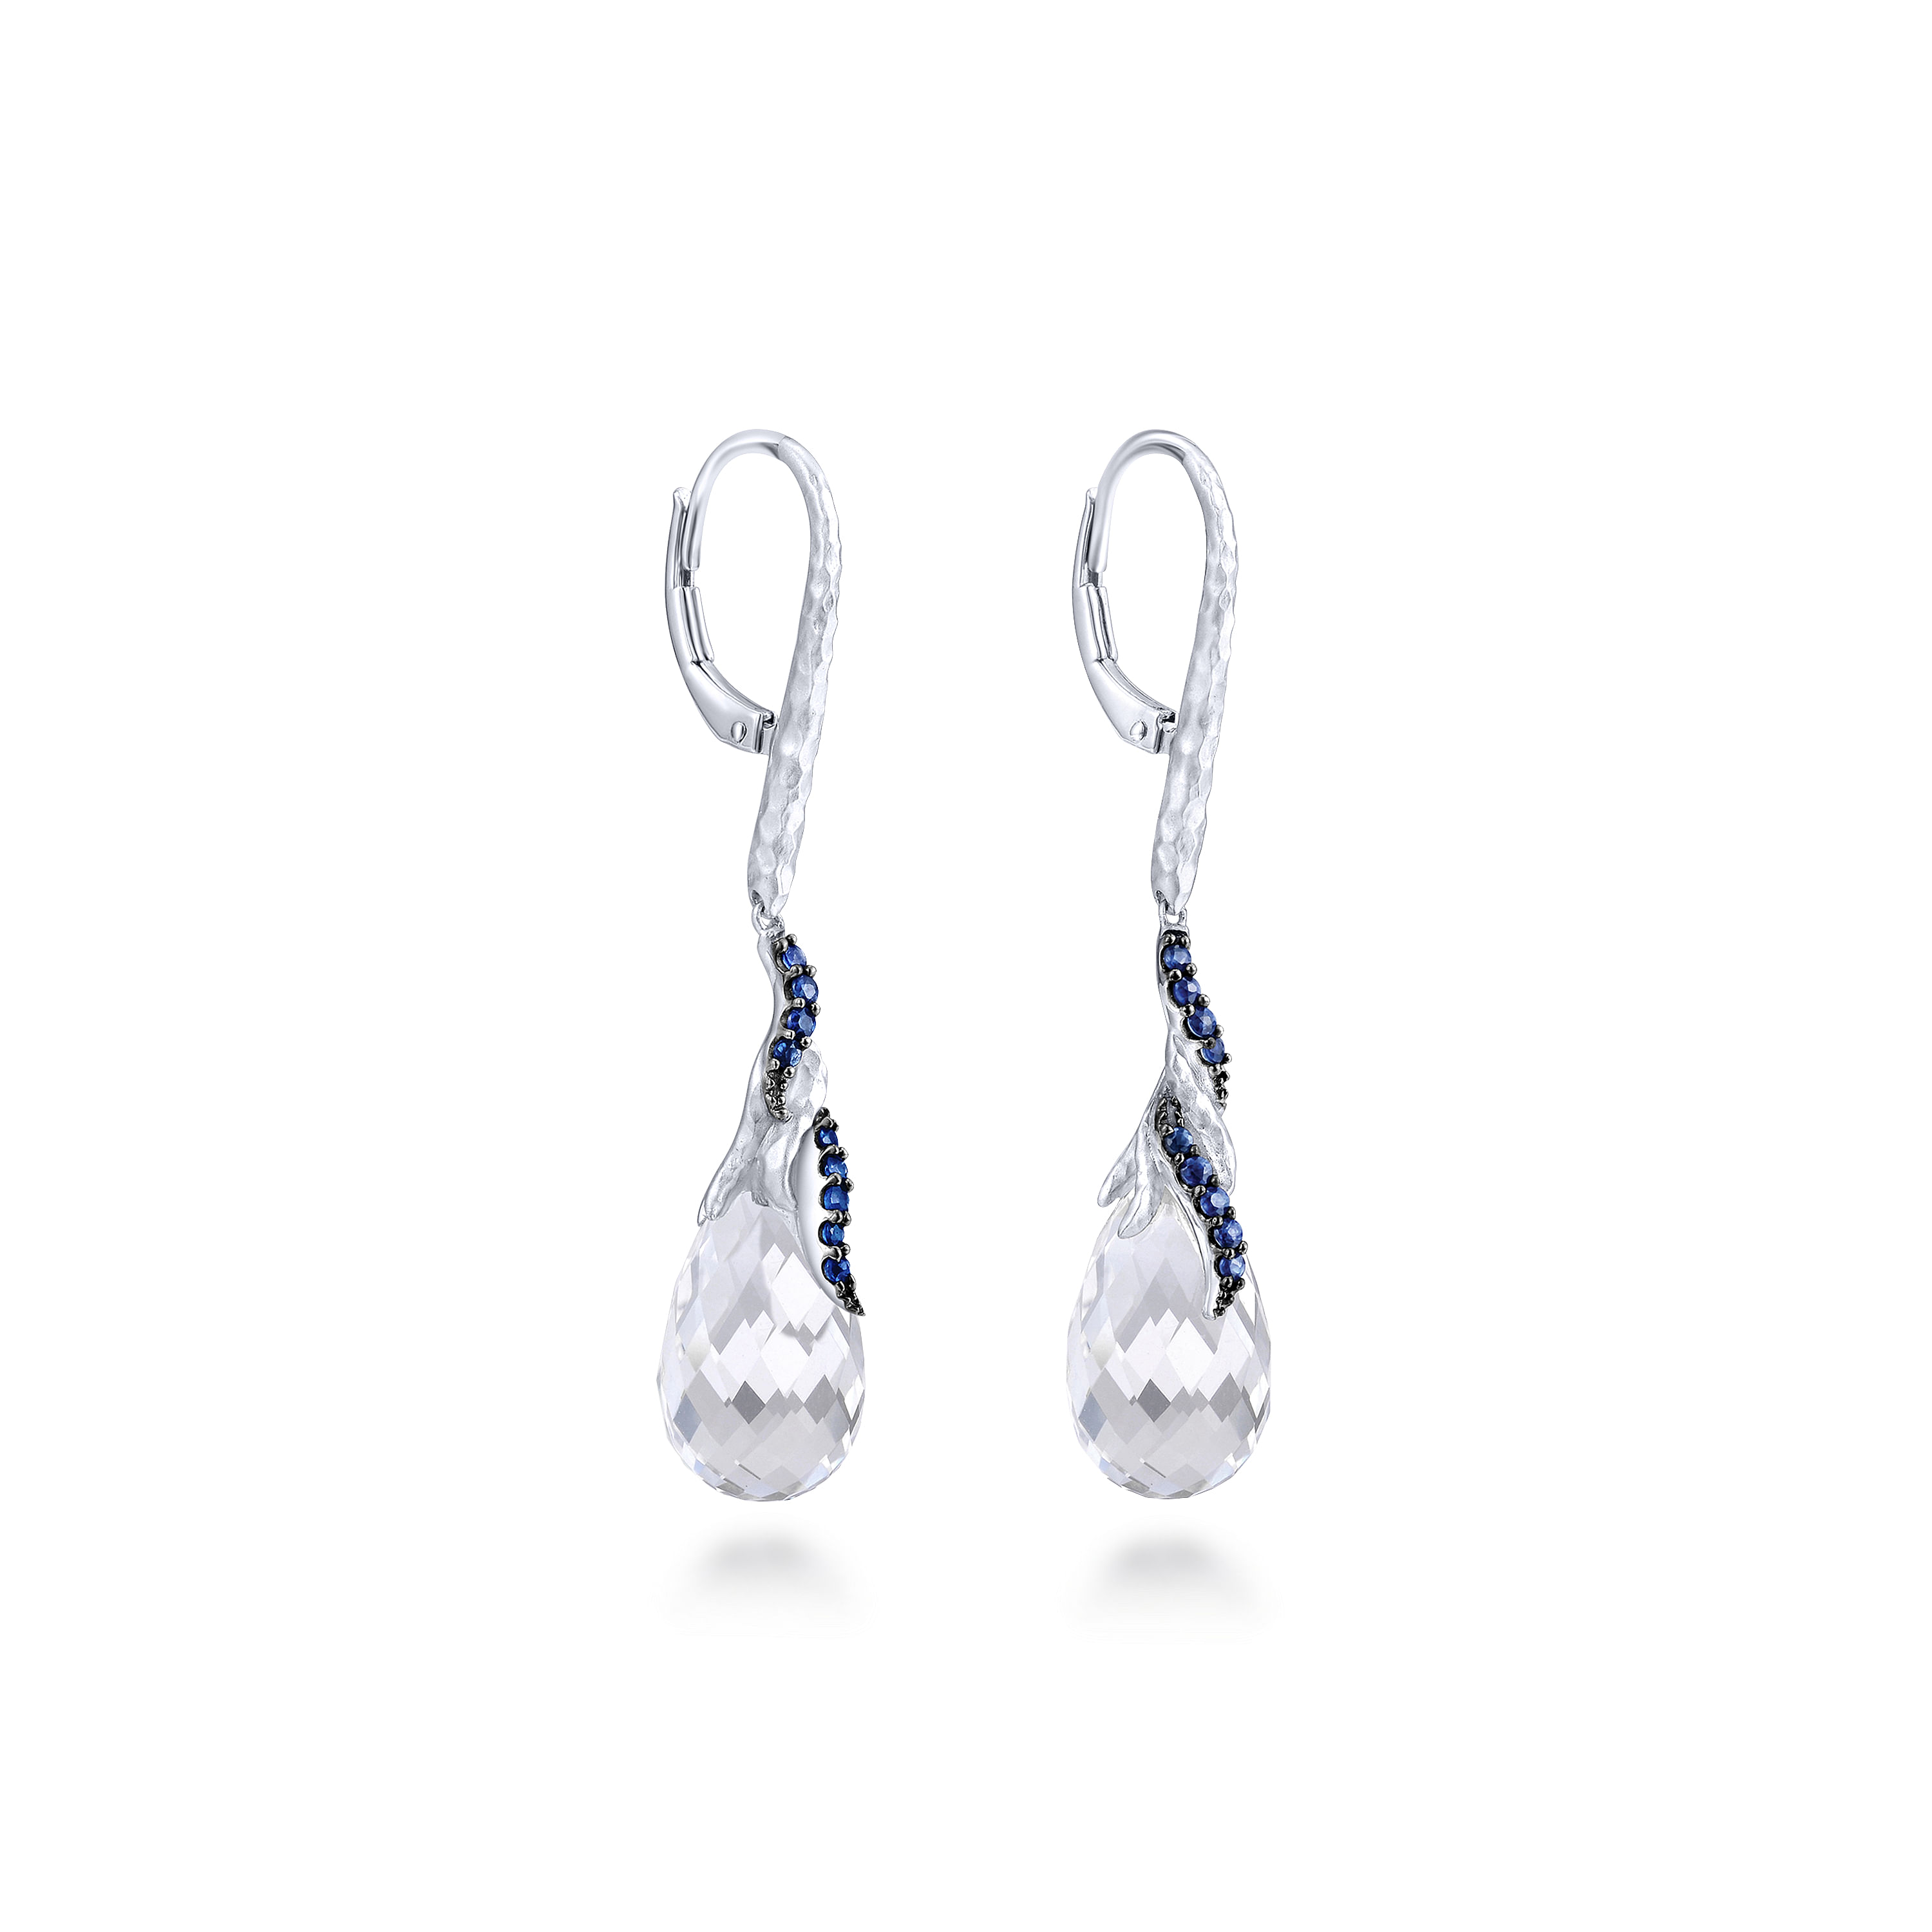 925 Sterling Silver Hammered Curving Strands Sapphire and Rock Crystal Teardrop Drop Earrings